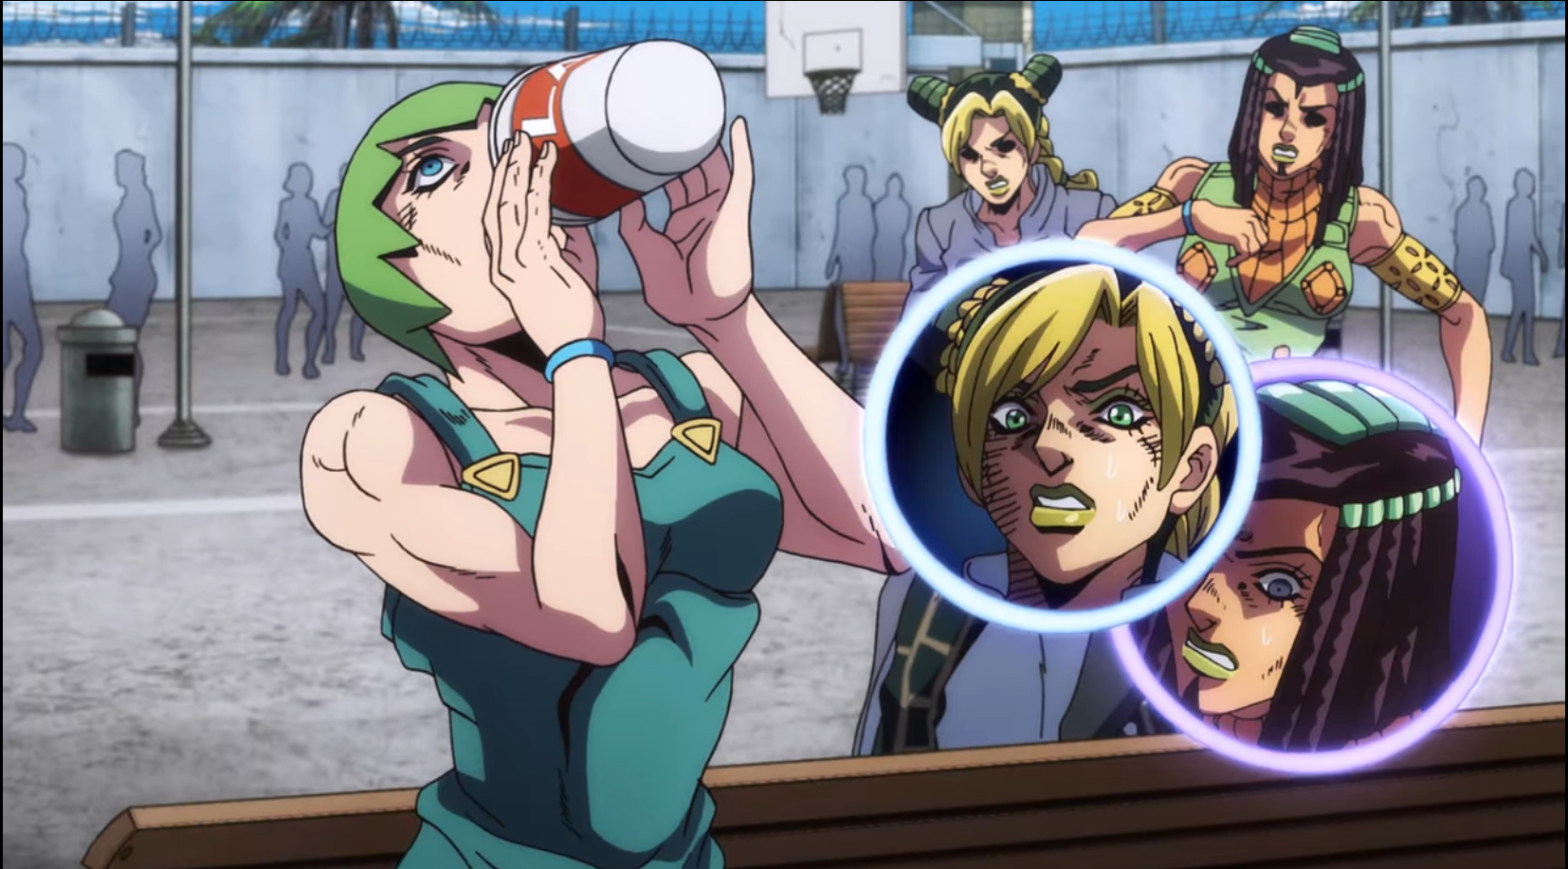 ALL STANDS IN STONE OCEAN (anime ver.) 